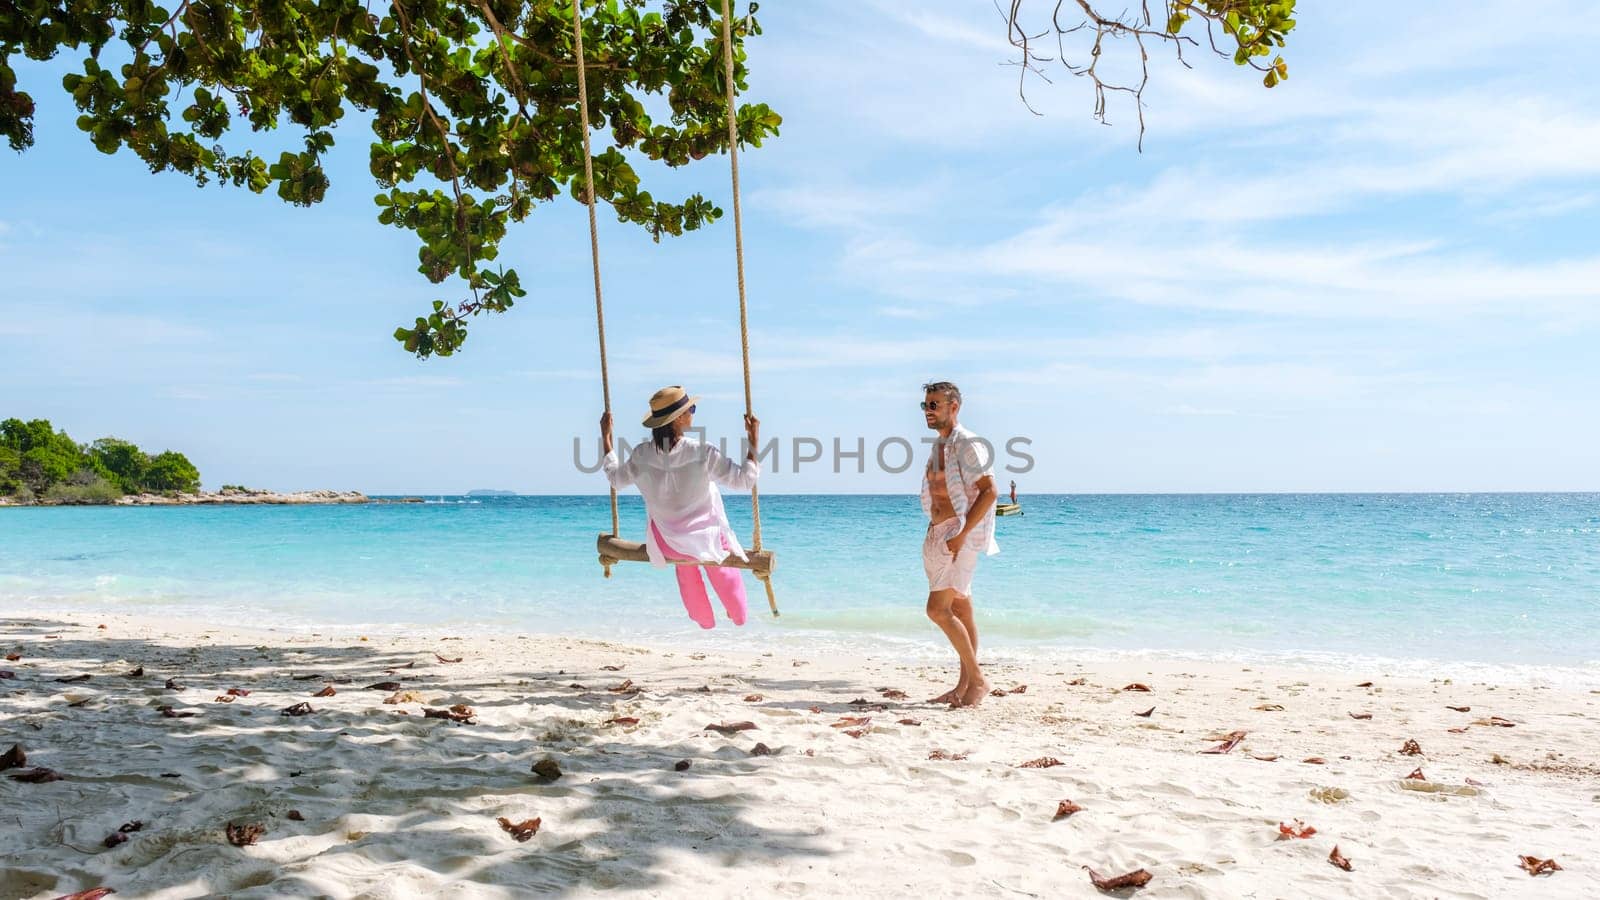 A couple of men and women at a swing on the beach of Koh Samet Island Rayong Thailand, the white tropical beach of Samed Island with a turqouse colored ocean. Asian woman and European men on vacation